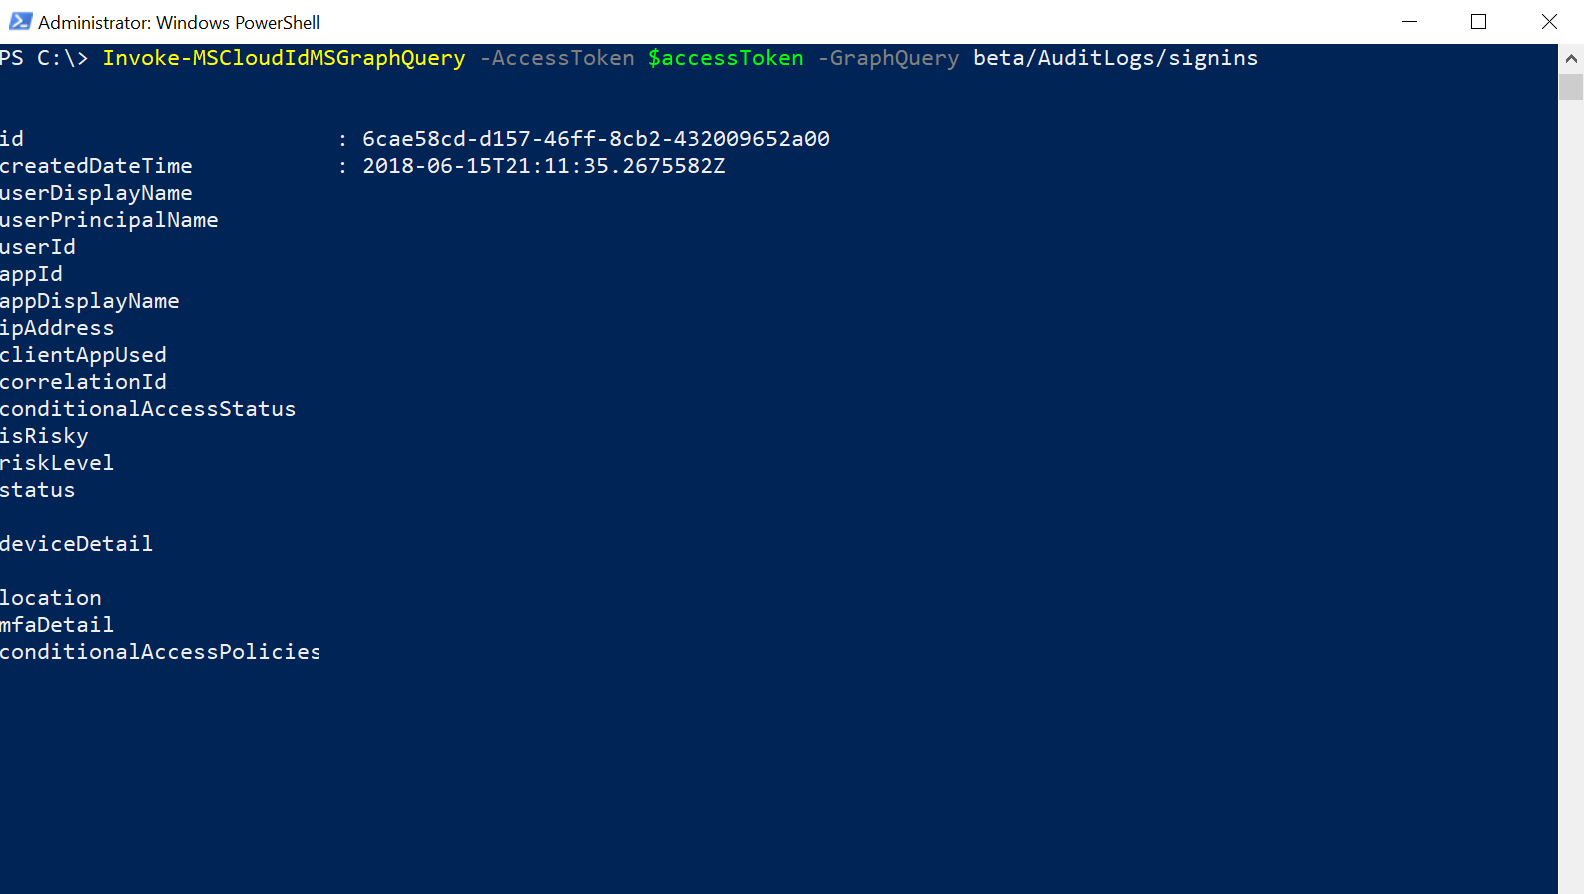 Screenshot shows a PowerShell window with a command to query the signins endpoint using the access token from earlier in this procedure.